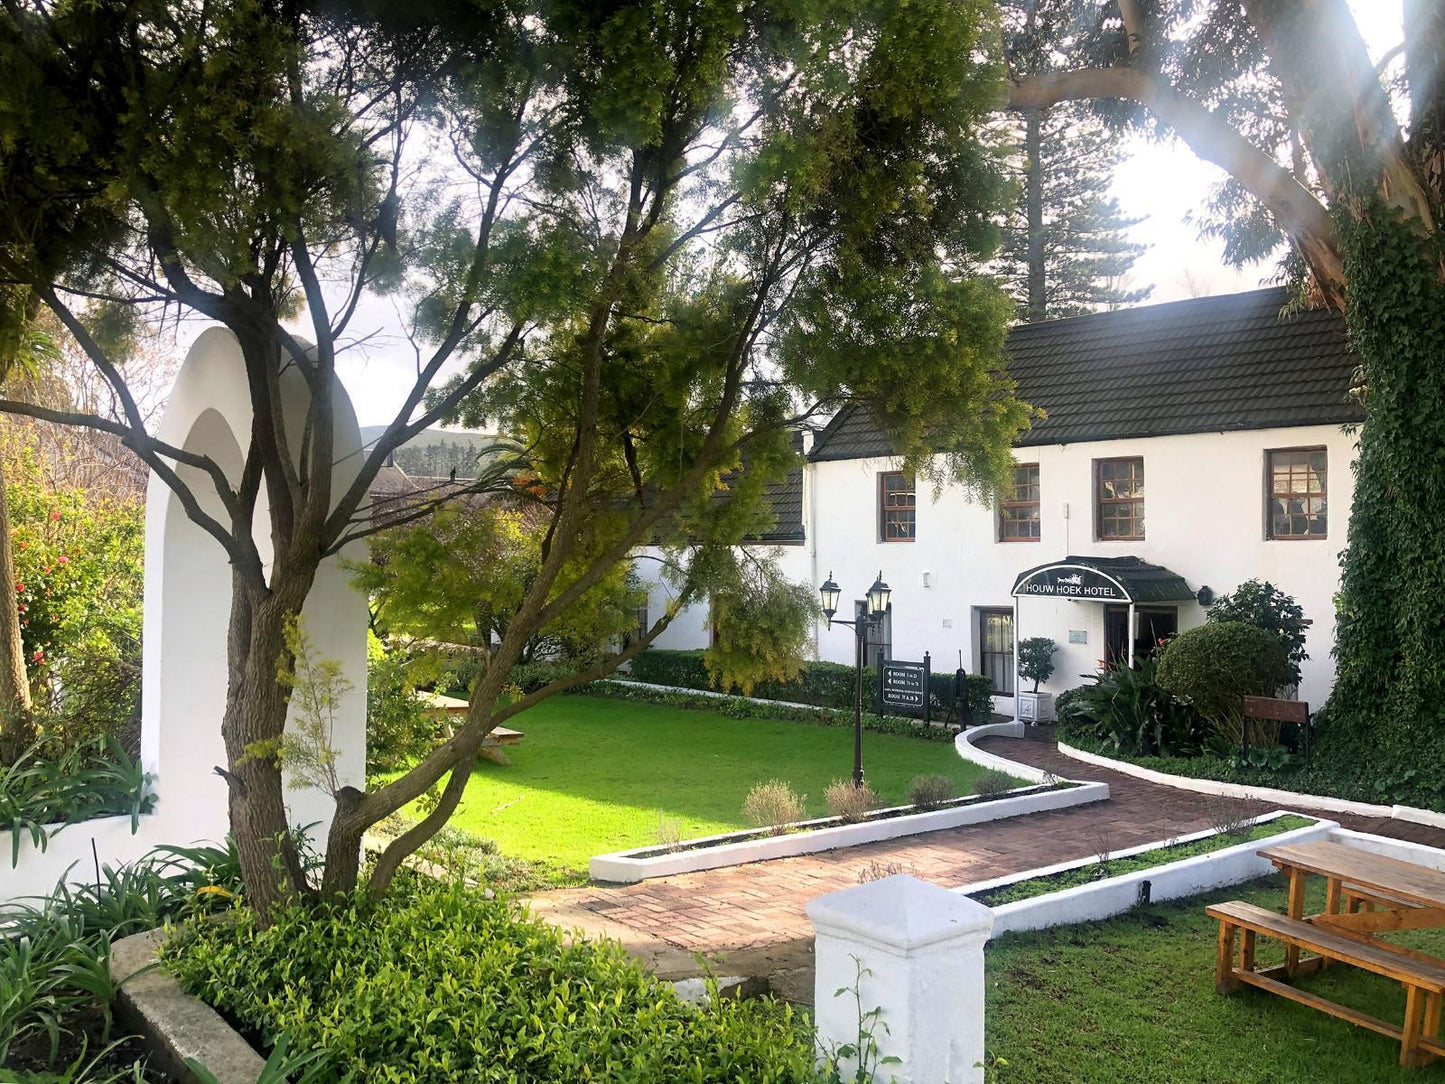 Houw Hoek Hotel Grabouw Western Cape South Africa House, Building, Architecture, Garden, Nature, Plant